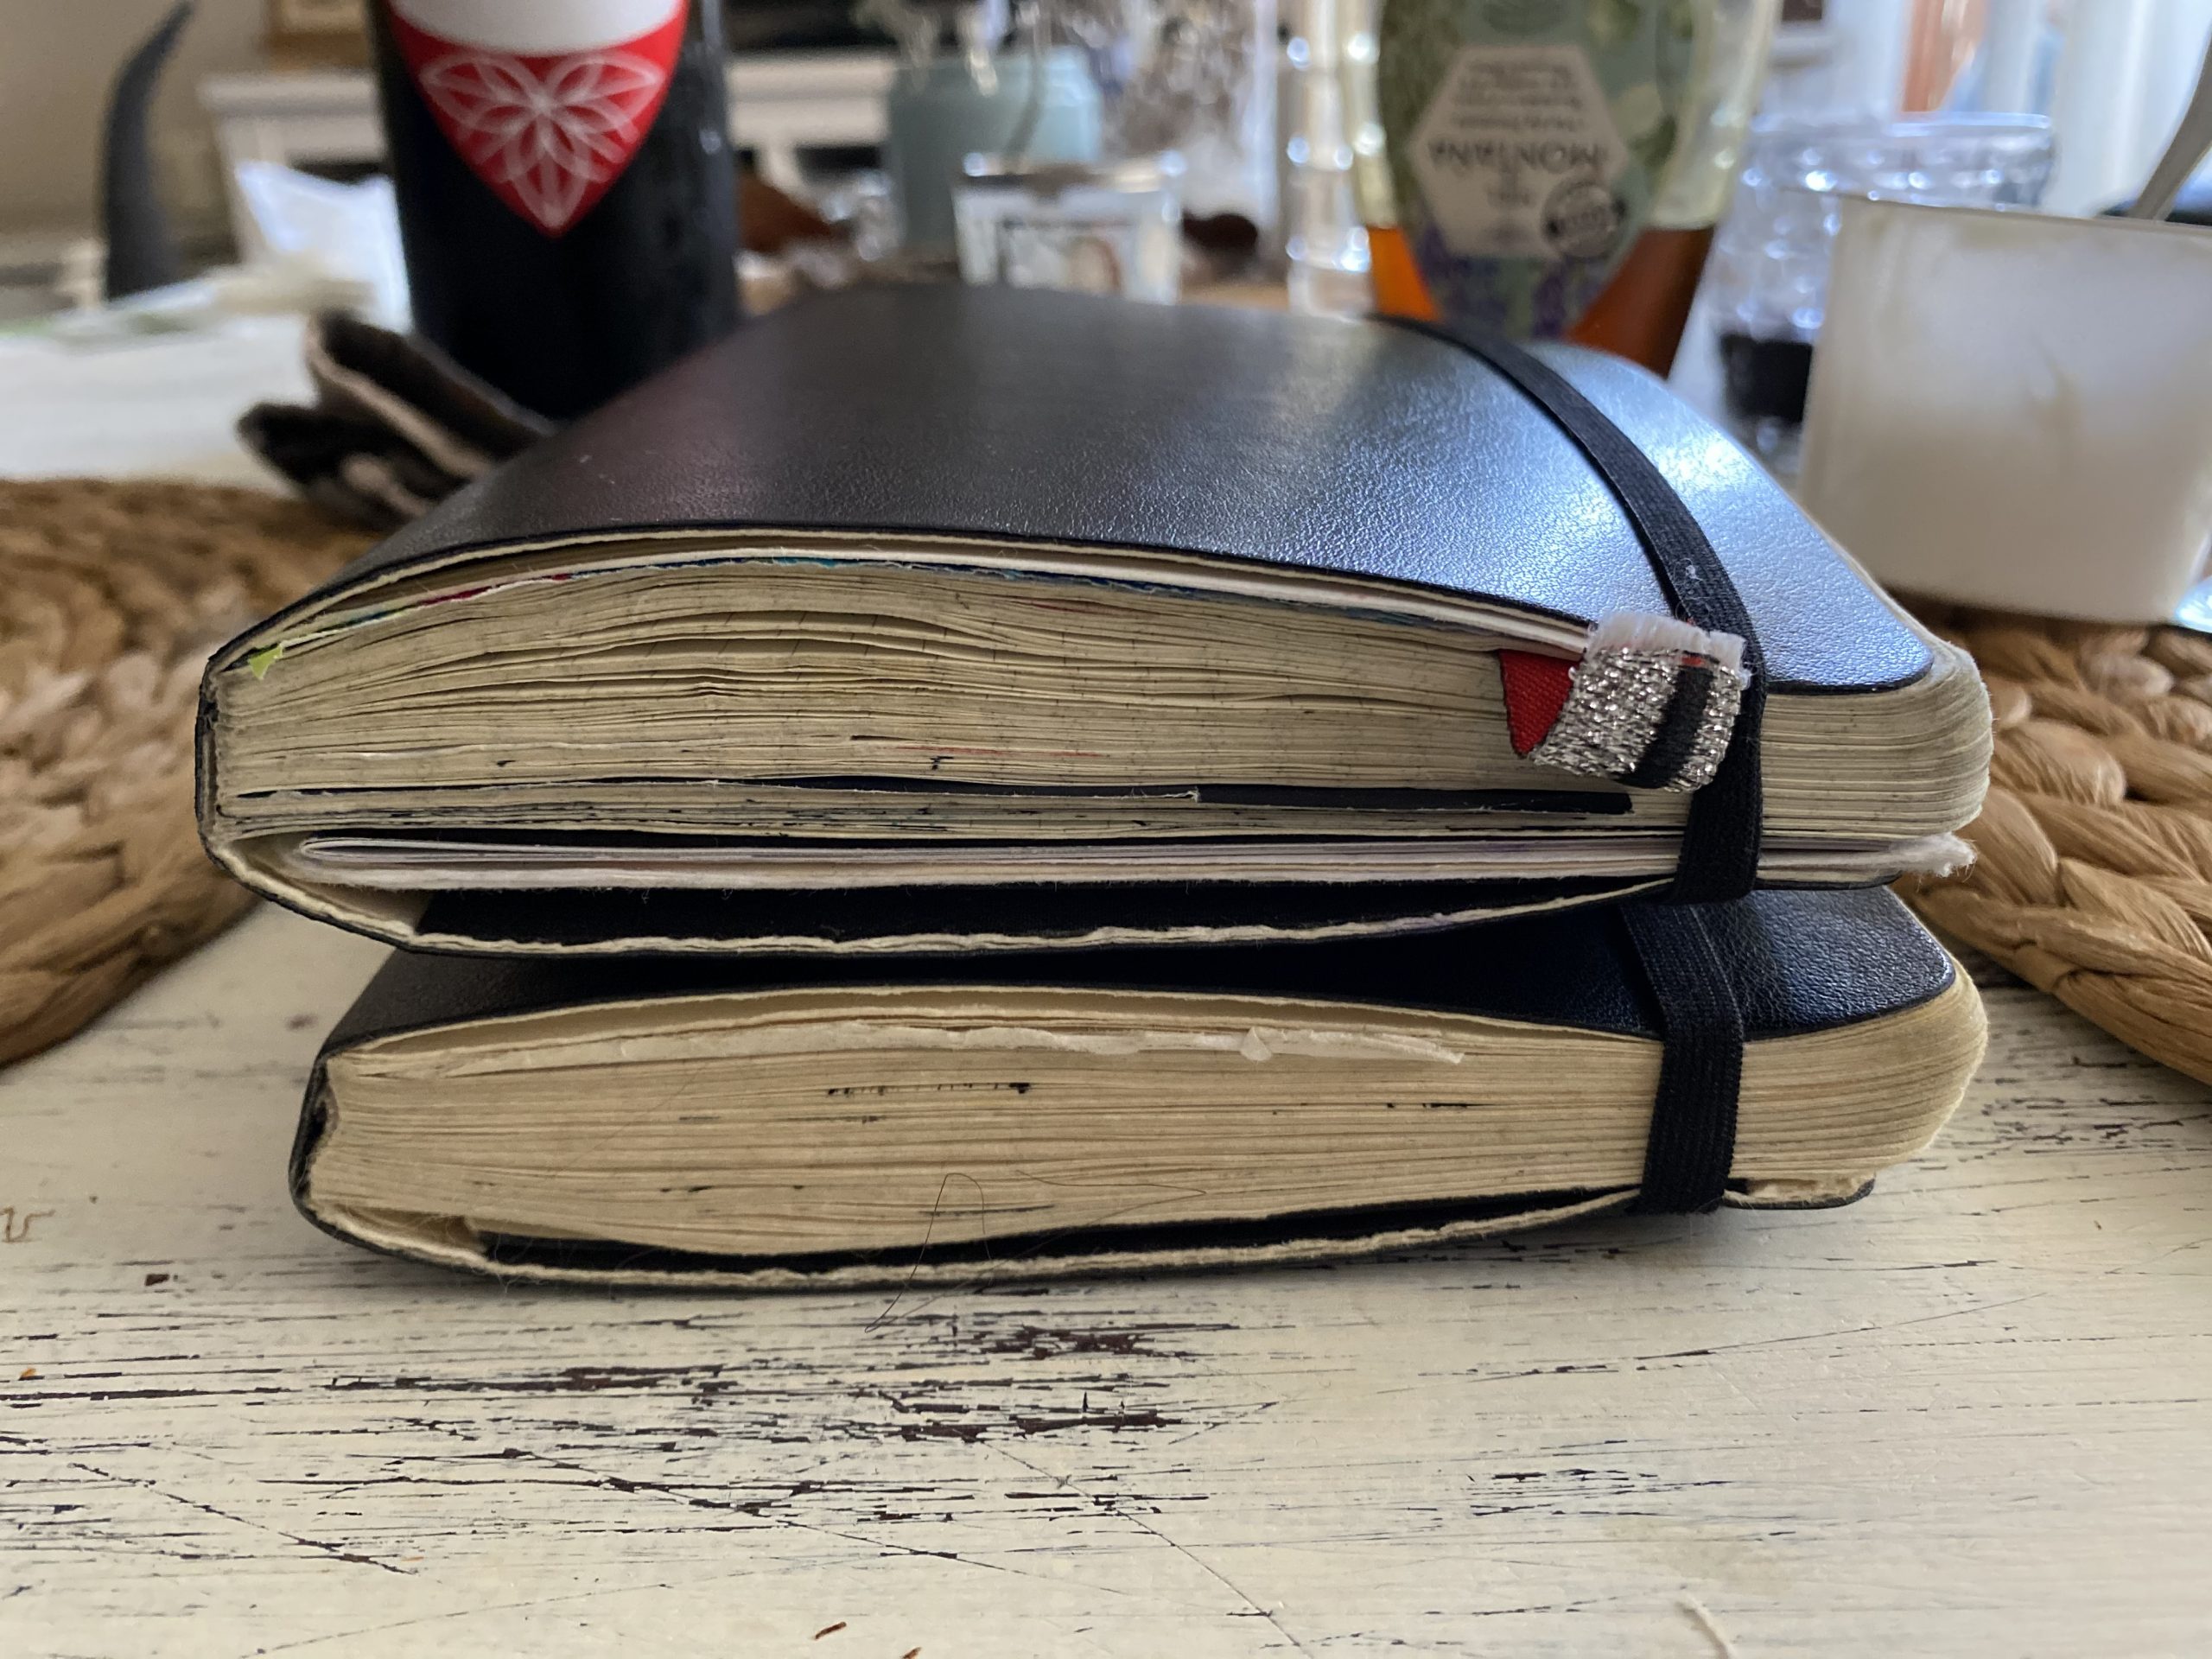 My two first moleskine finished notebooks